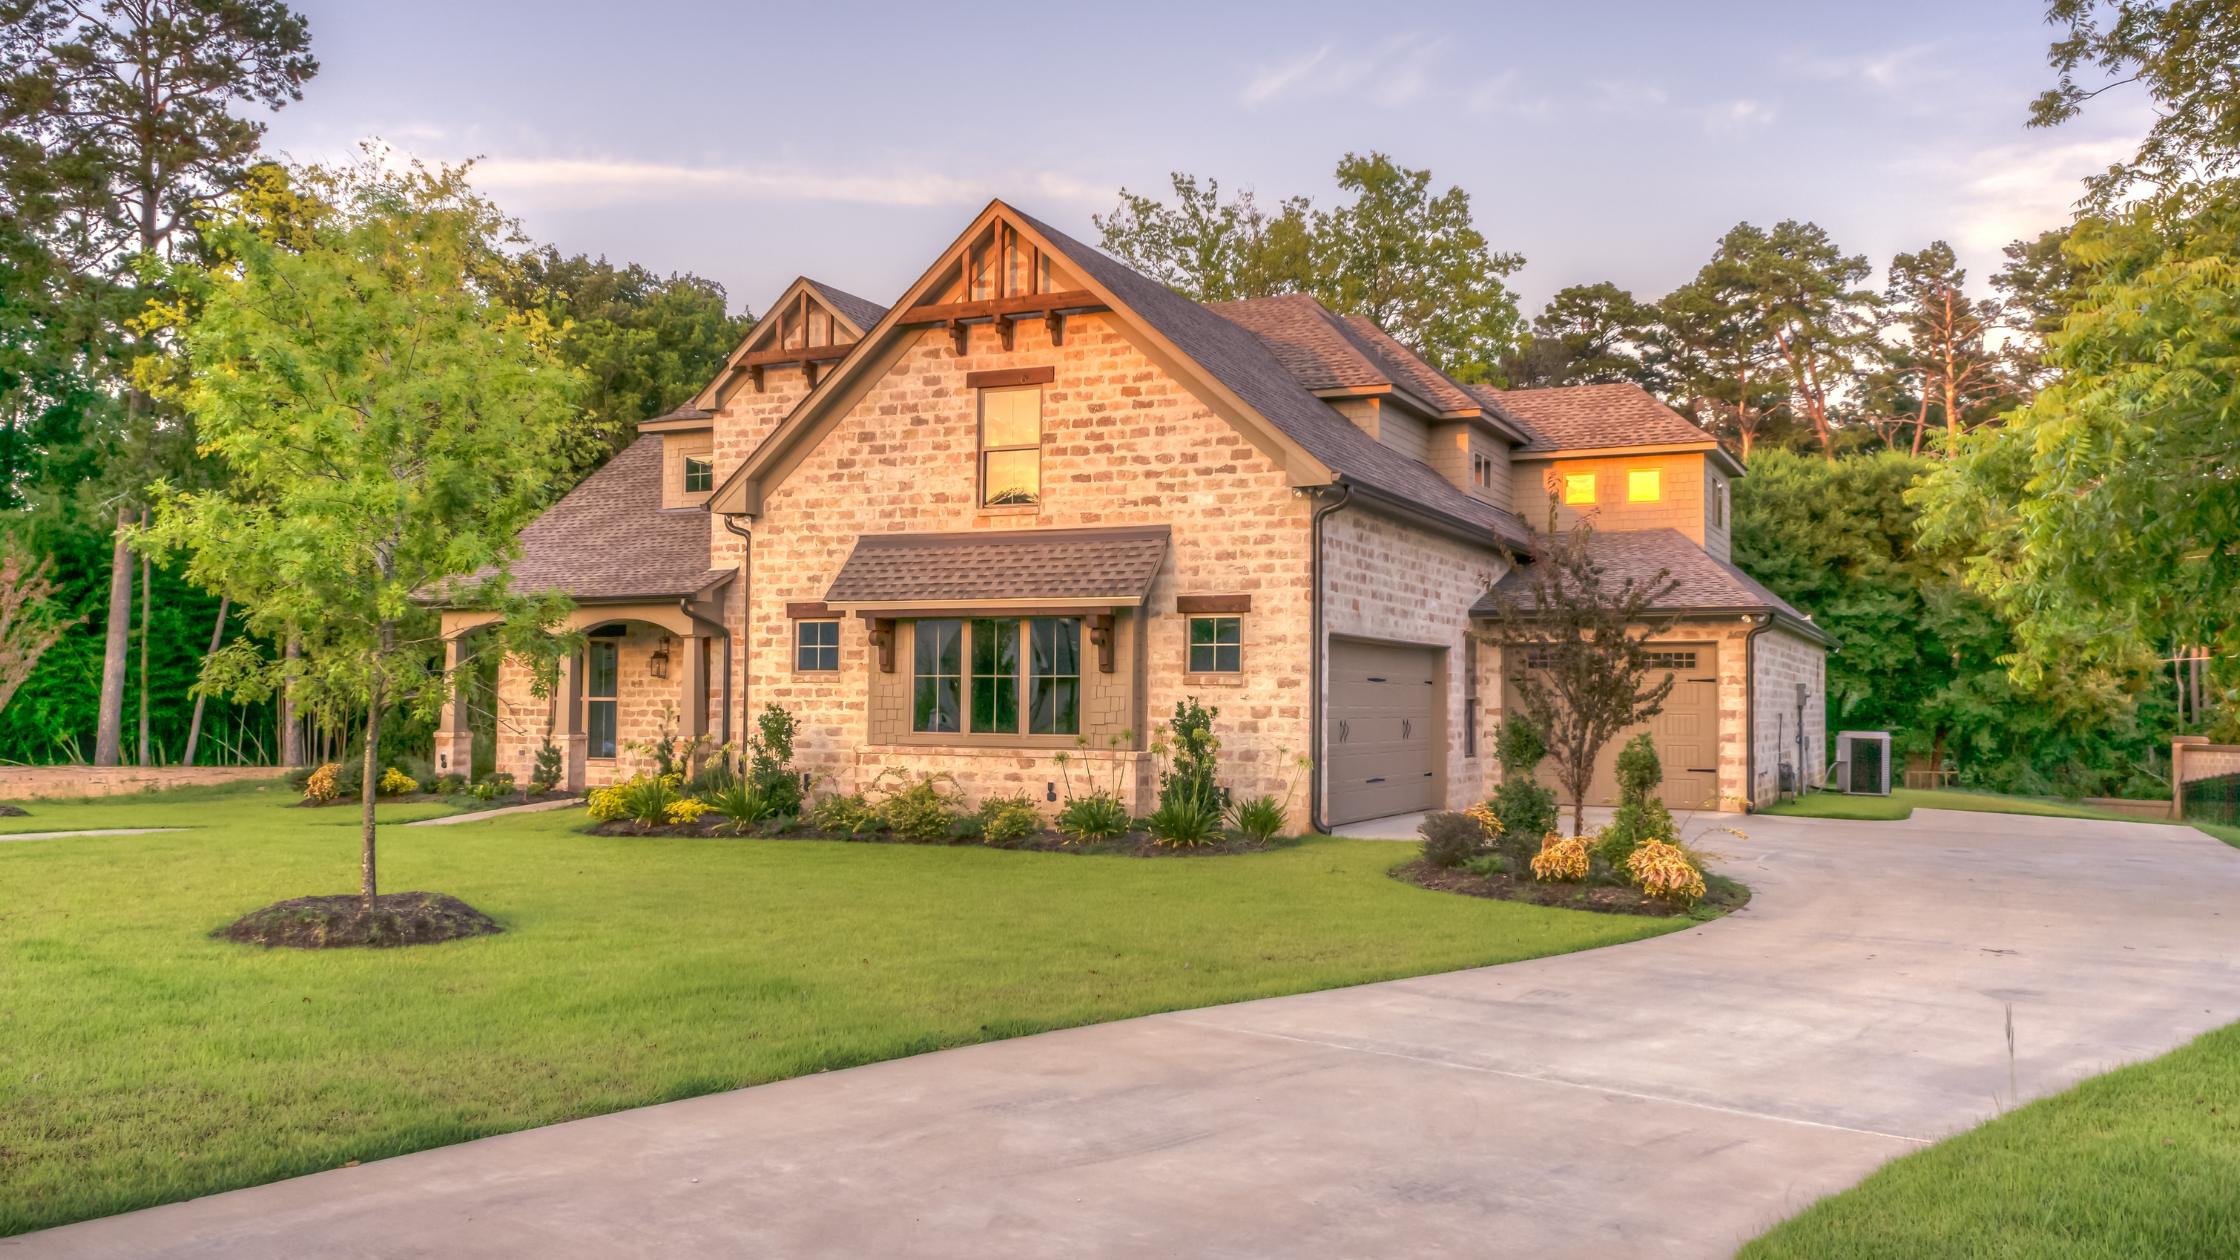 5 strategies for maximizing your home's value when selling